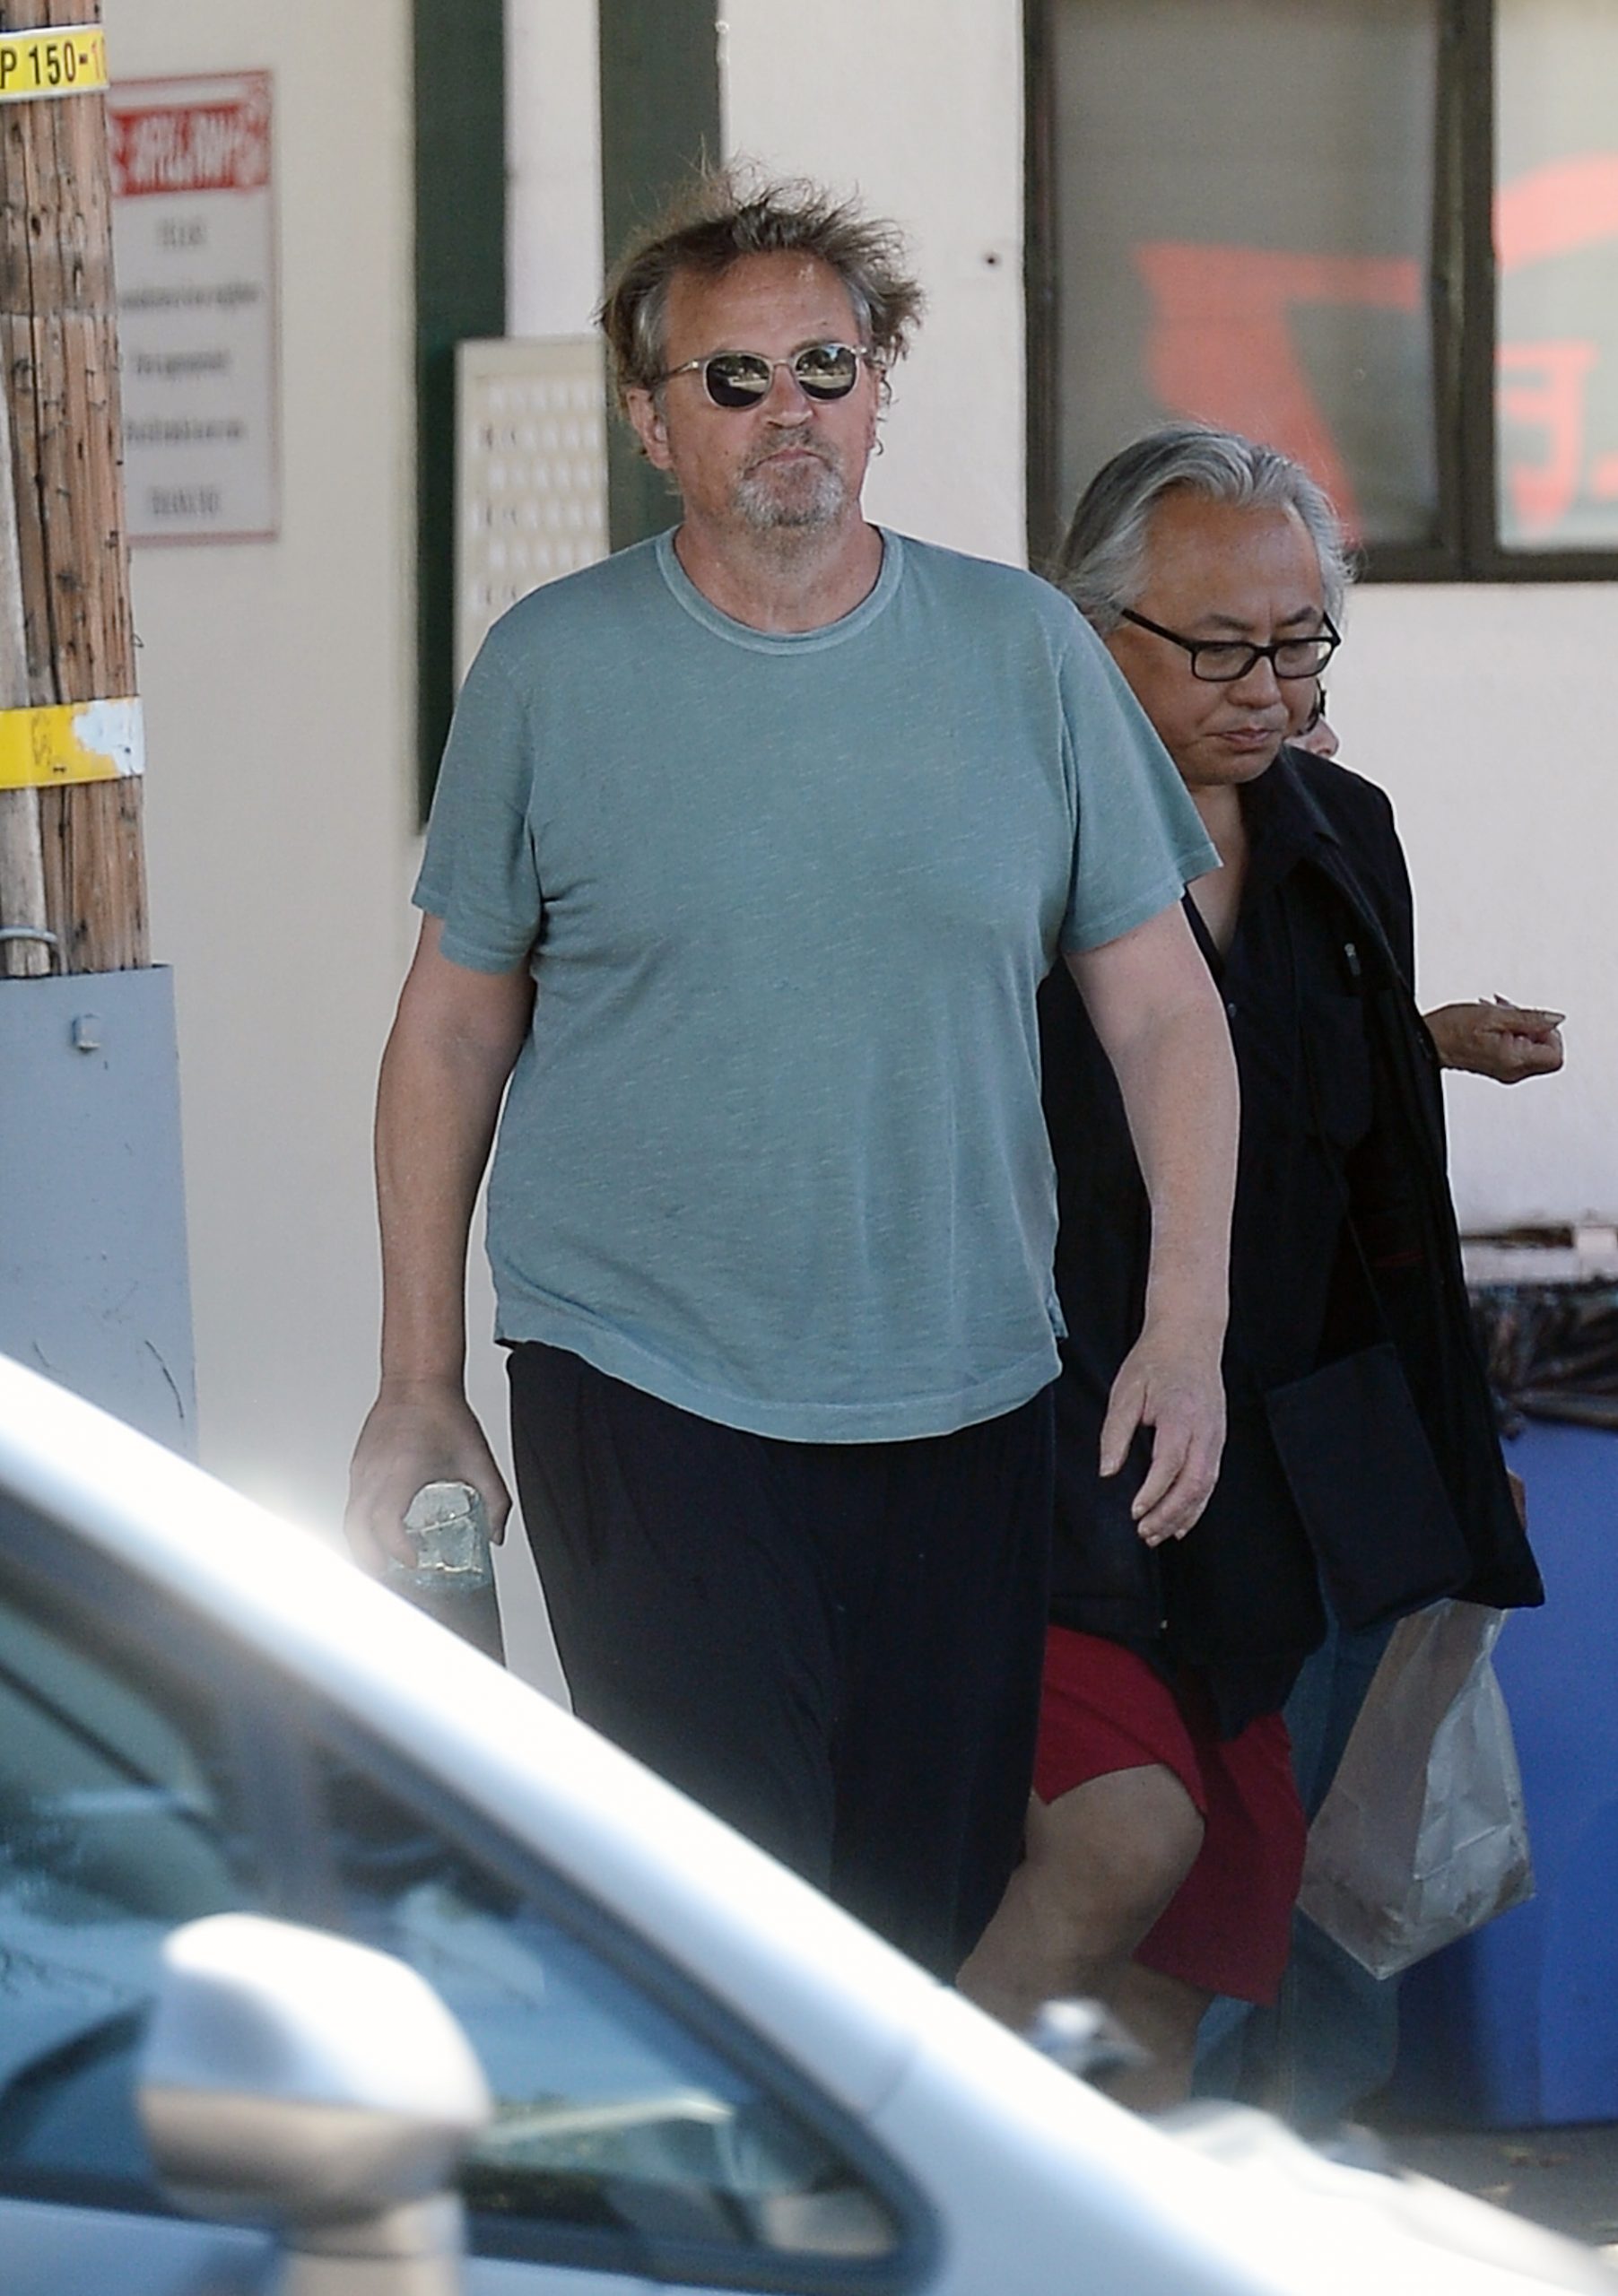 Matthew Perry looked downcast while out having dinner just days before Friends star’s shocking death